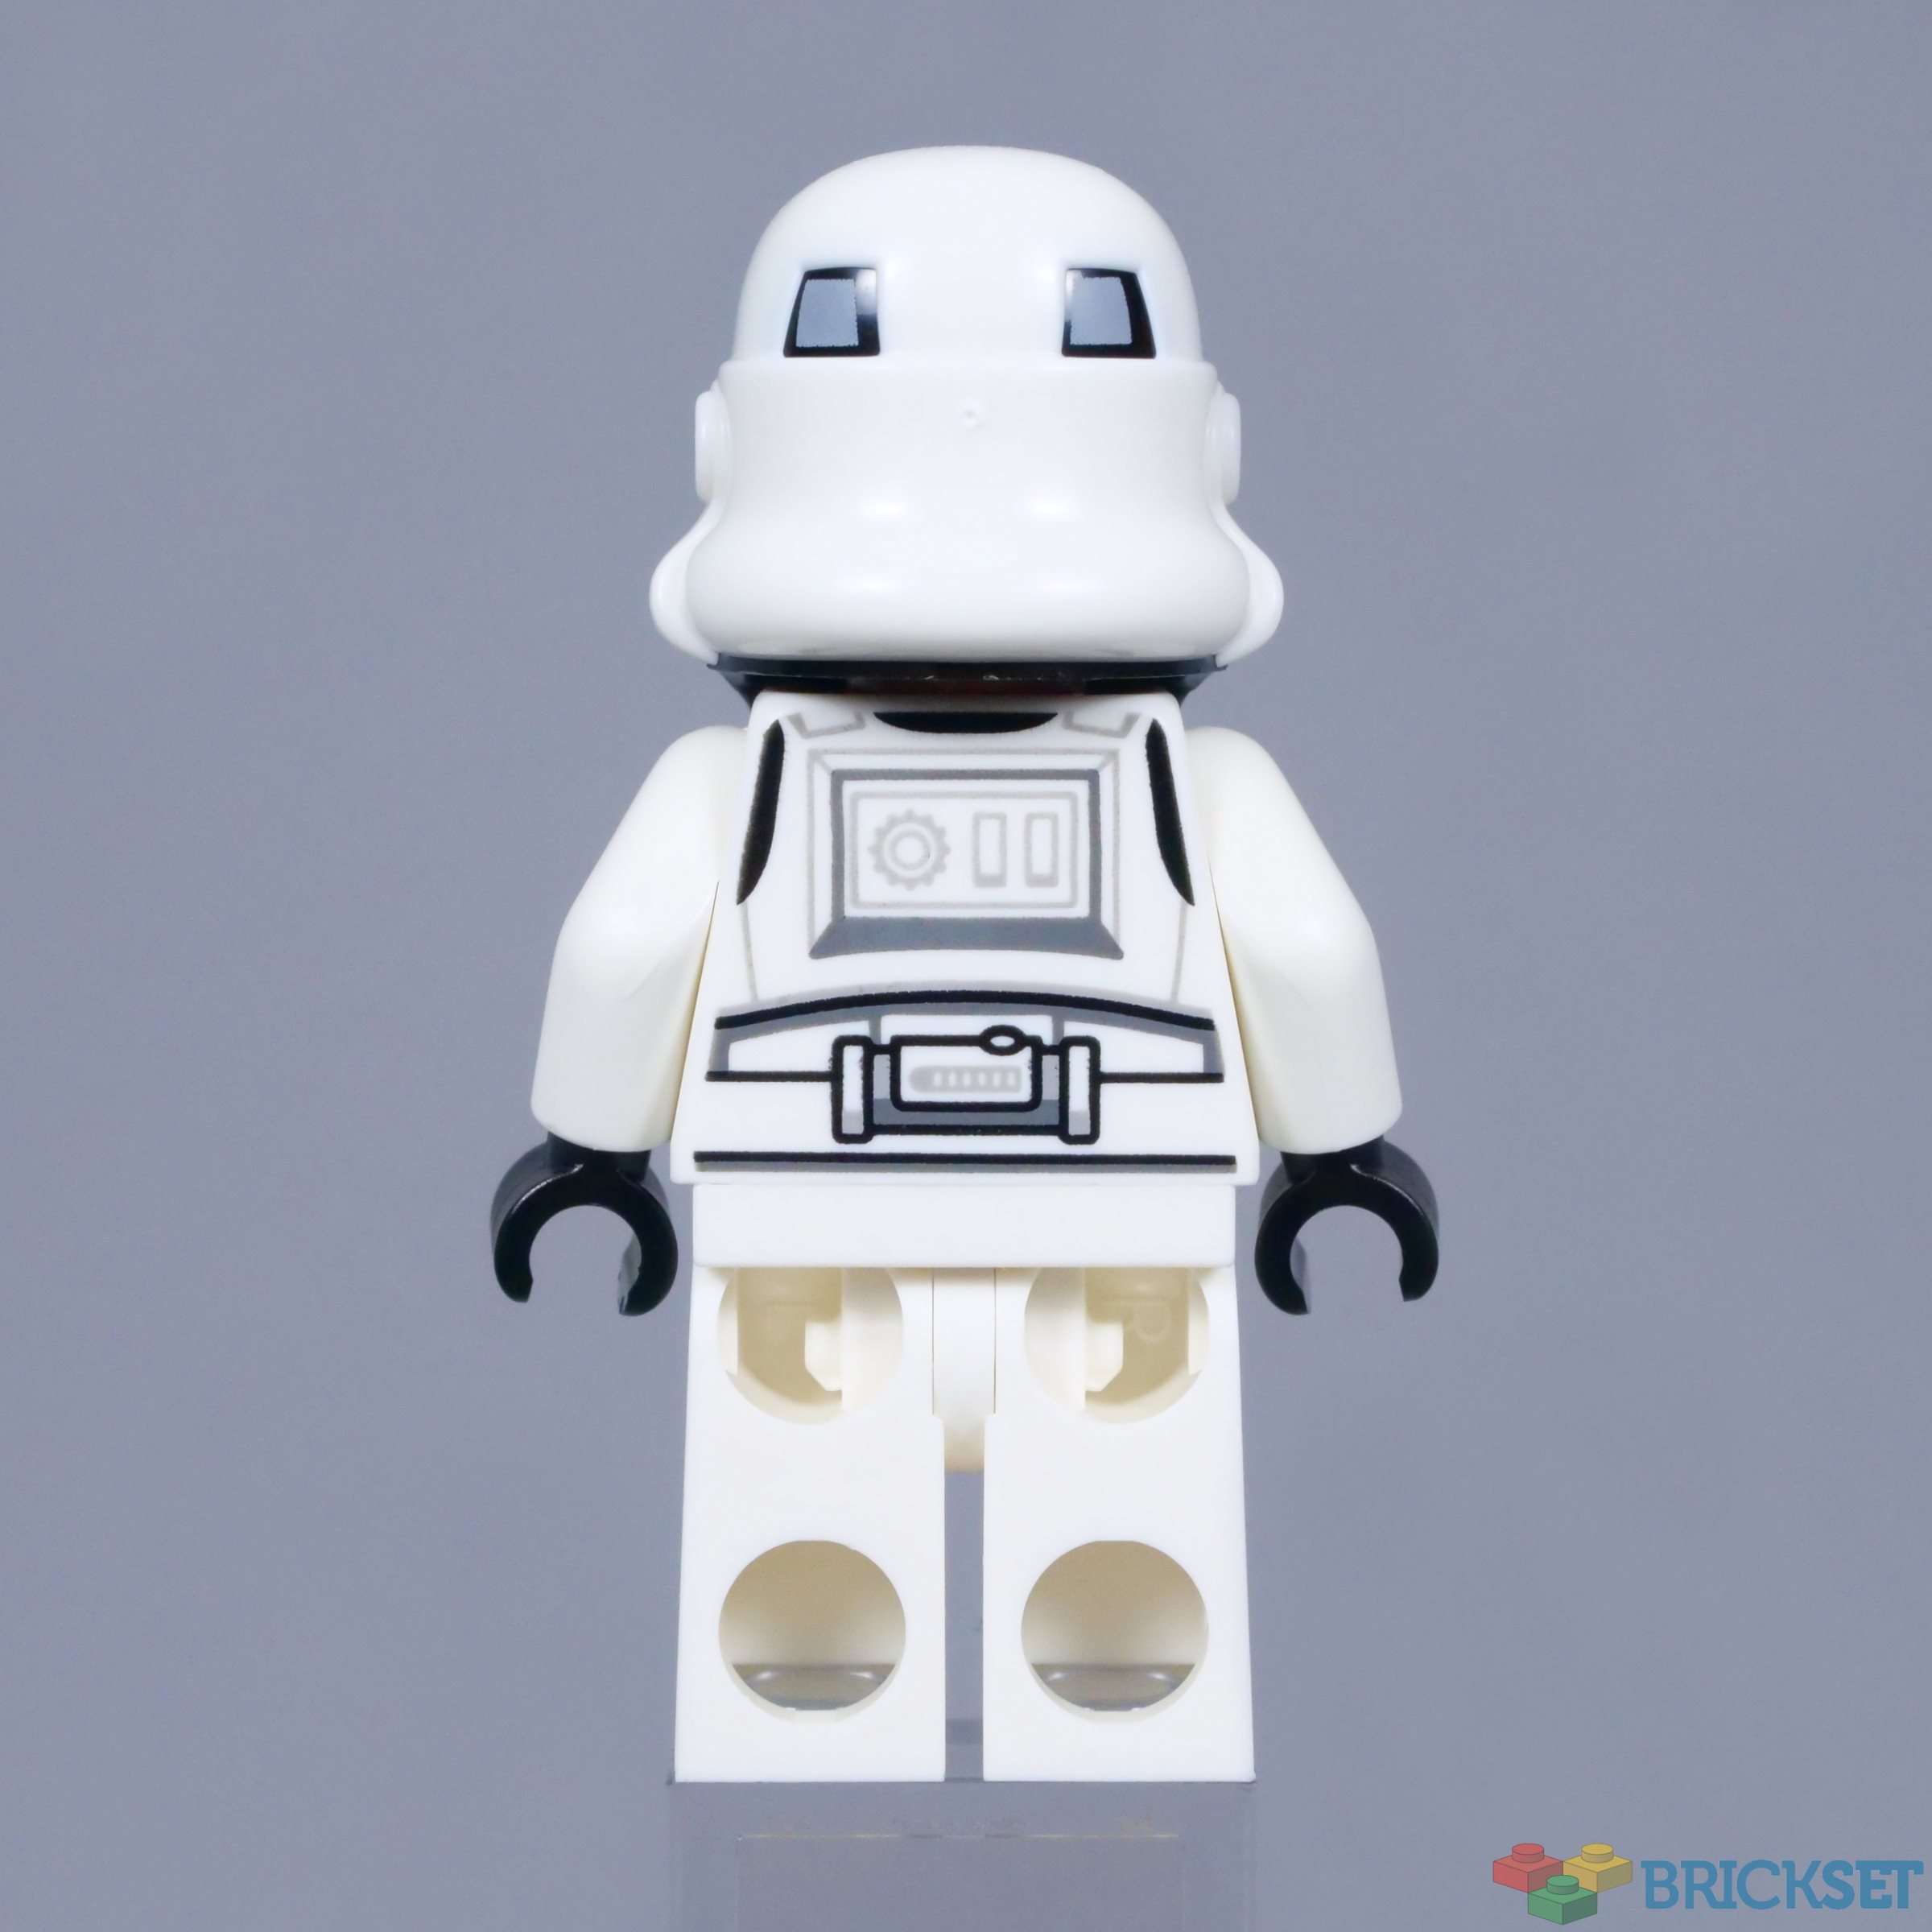 10 Expensive LEGO Star Wars Stormtroopers You May Own! 